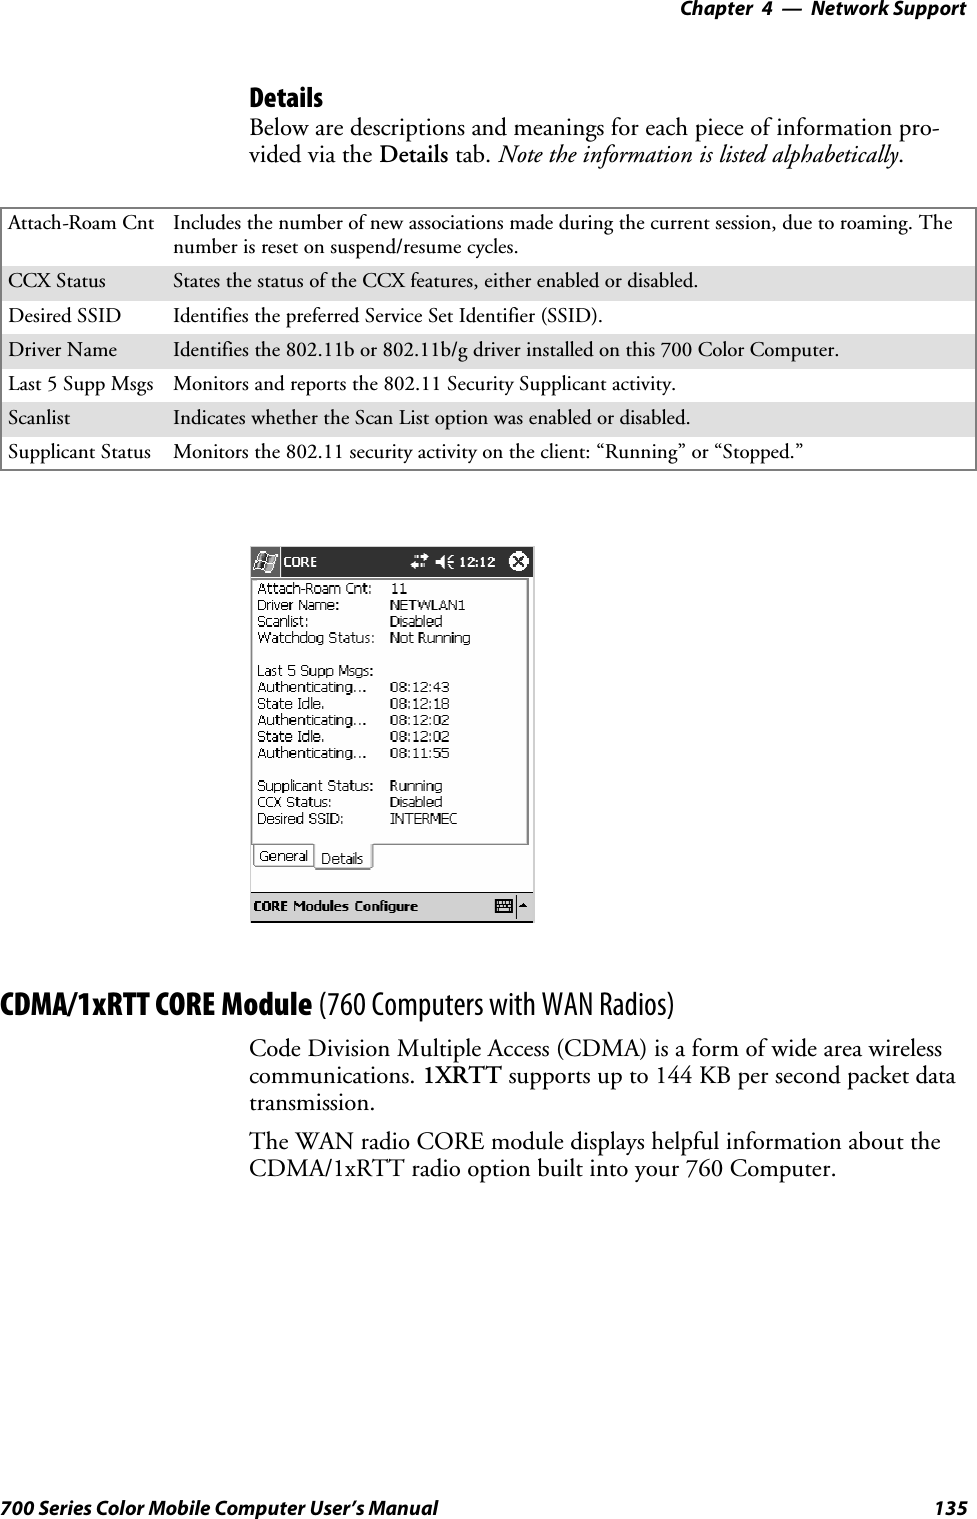 Network Support—Chapter 4135700 Series Color Mobile Computer User’s ManualDetailsBelow are descriptions and meanings for each piece of information pro-vided via the Details tab. Note the information is listed alphabetically.Attach-Roam Cnt Includes the number of new associations made during the current session, due to roaming. Thenumber is reset on suspend/resume cycles.CCX Status States the status of the CCX features, either enabled or disabled.Desired SSID Identifies the preferred Service Set Identifier (SSID).Driver Name Identifies the 802.11b or 802.11b/g driver installed on this 700 Color Computer.Last 5 Supp Msgs Monitors and reports the 802.11 Security Supplicant activity.Scanlist Indicates whether the Scan List option was enabled or disabled.Supplicant Status Monitors the 802.11 security activity on the client: “Running” or “Stopped.”CDMA/1xRTT CORE Module (760 Computers with WAN Radios)Code Division Multiple Access (CDMA) is a form of wide area wirelesscommunications. 1XRTT supports up to 144 KB per second packet datatransmission.The WAN radio CORE module displays helpful information about theCDMA/1xRTT radio option built into your 760 Computer.